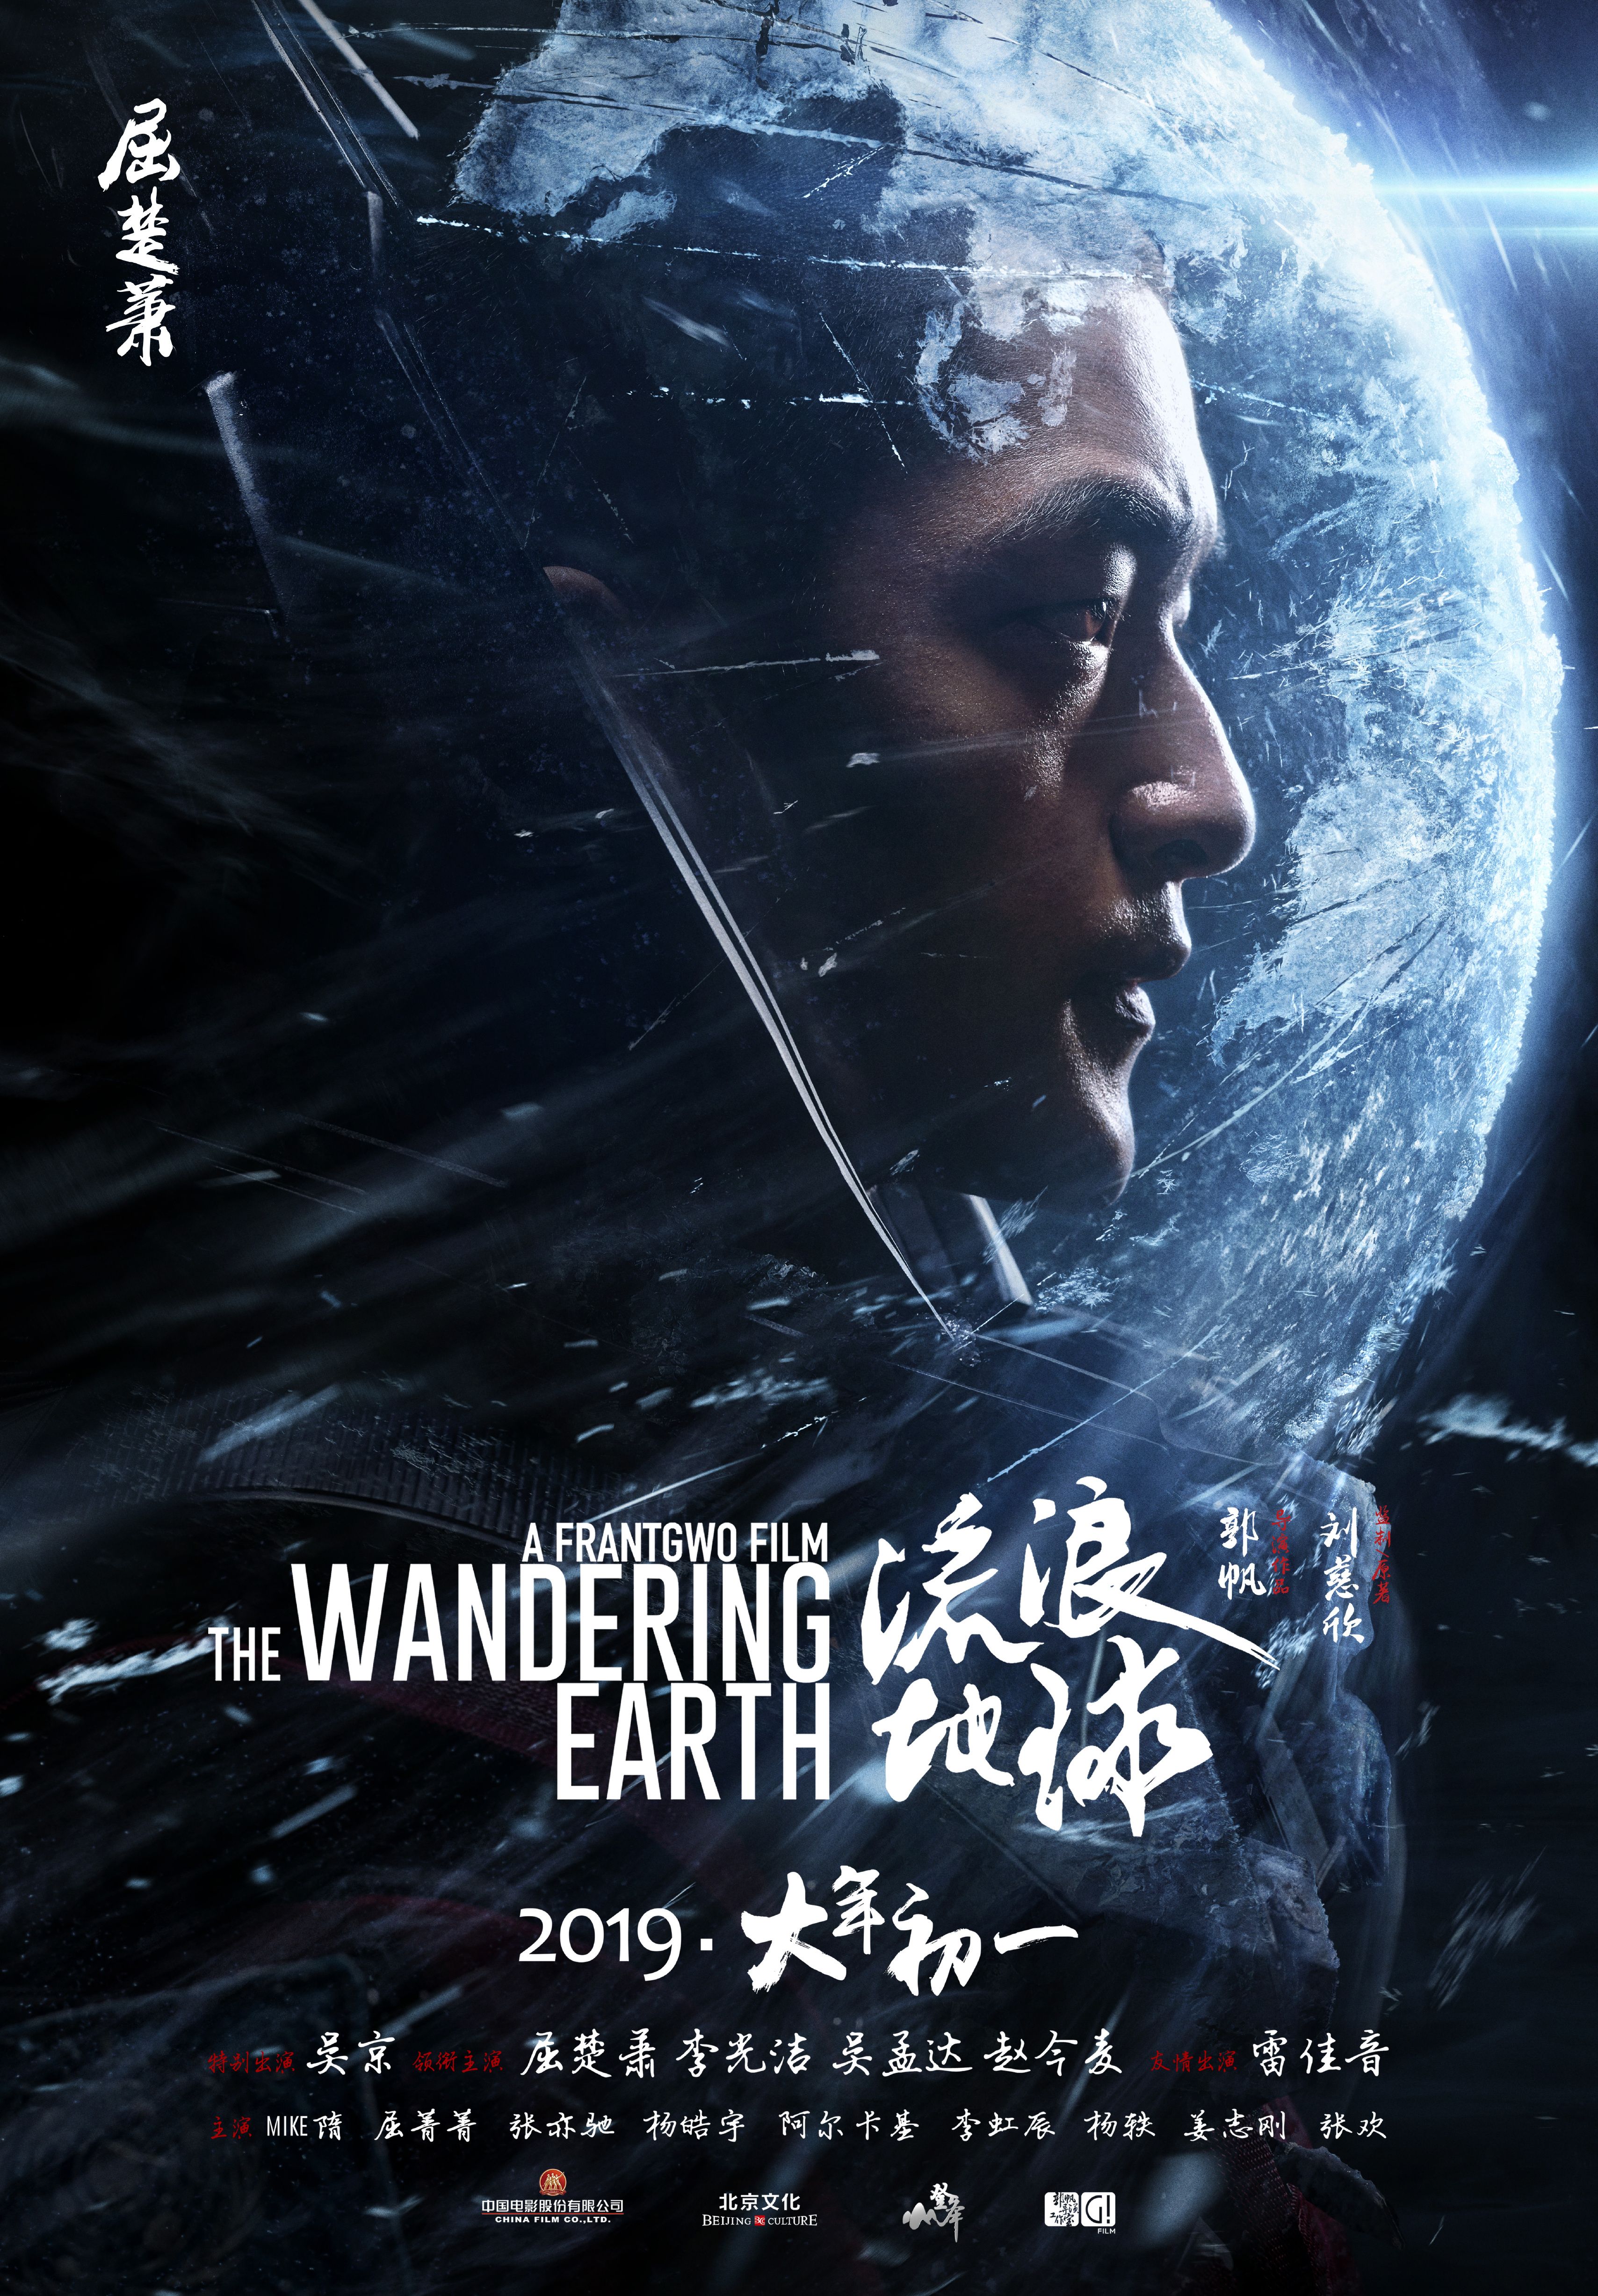 The Wandering Earth Poster 17: Full Size Poster Image